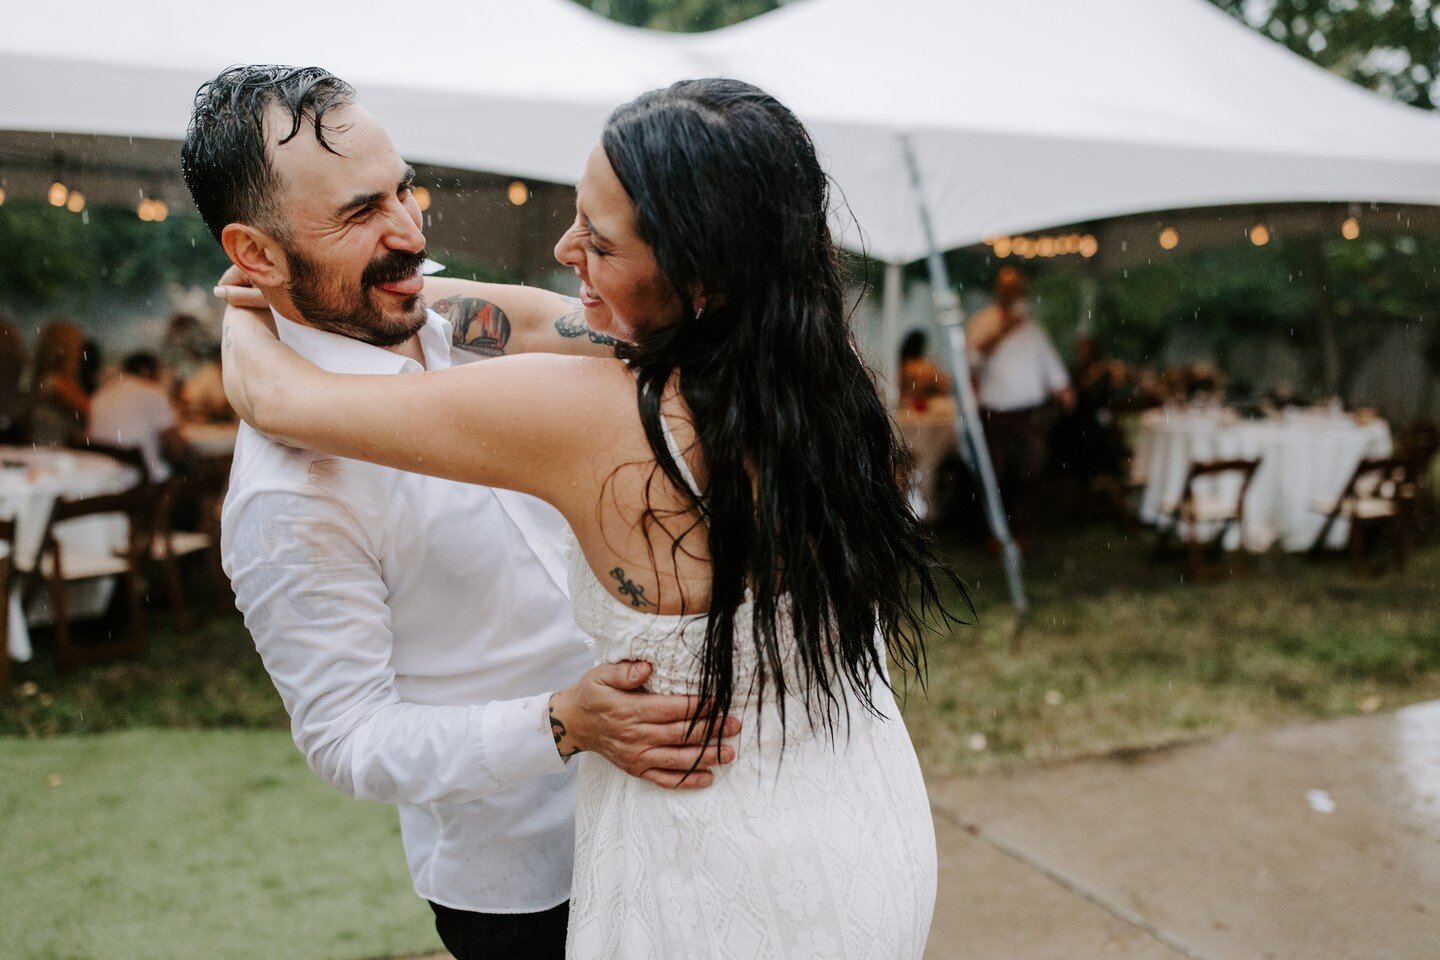 No fair weather love to be found here. These two didn't hesitate to kick off their shoes (literally), throw caution to the wind, and embrace the rain on their wedding day, and it was one of the most fun wedding days ever. There's something magical ab